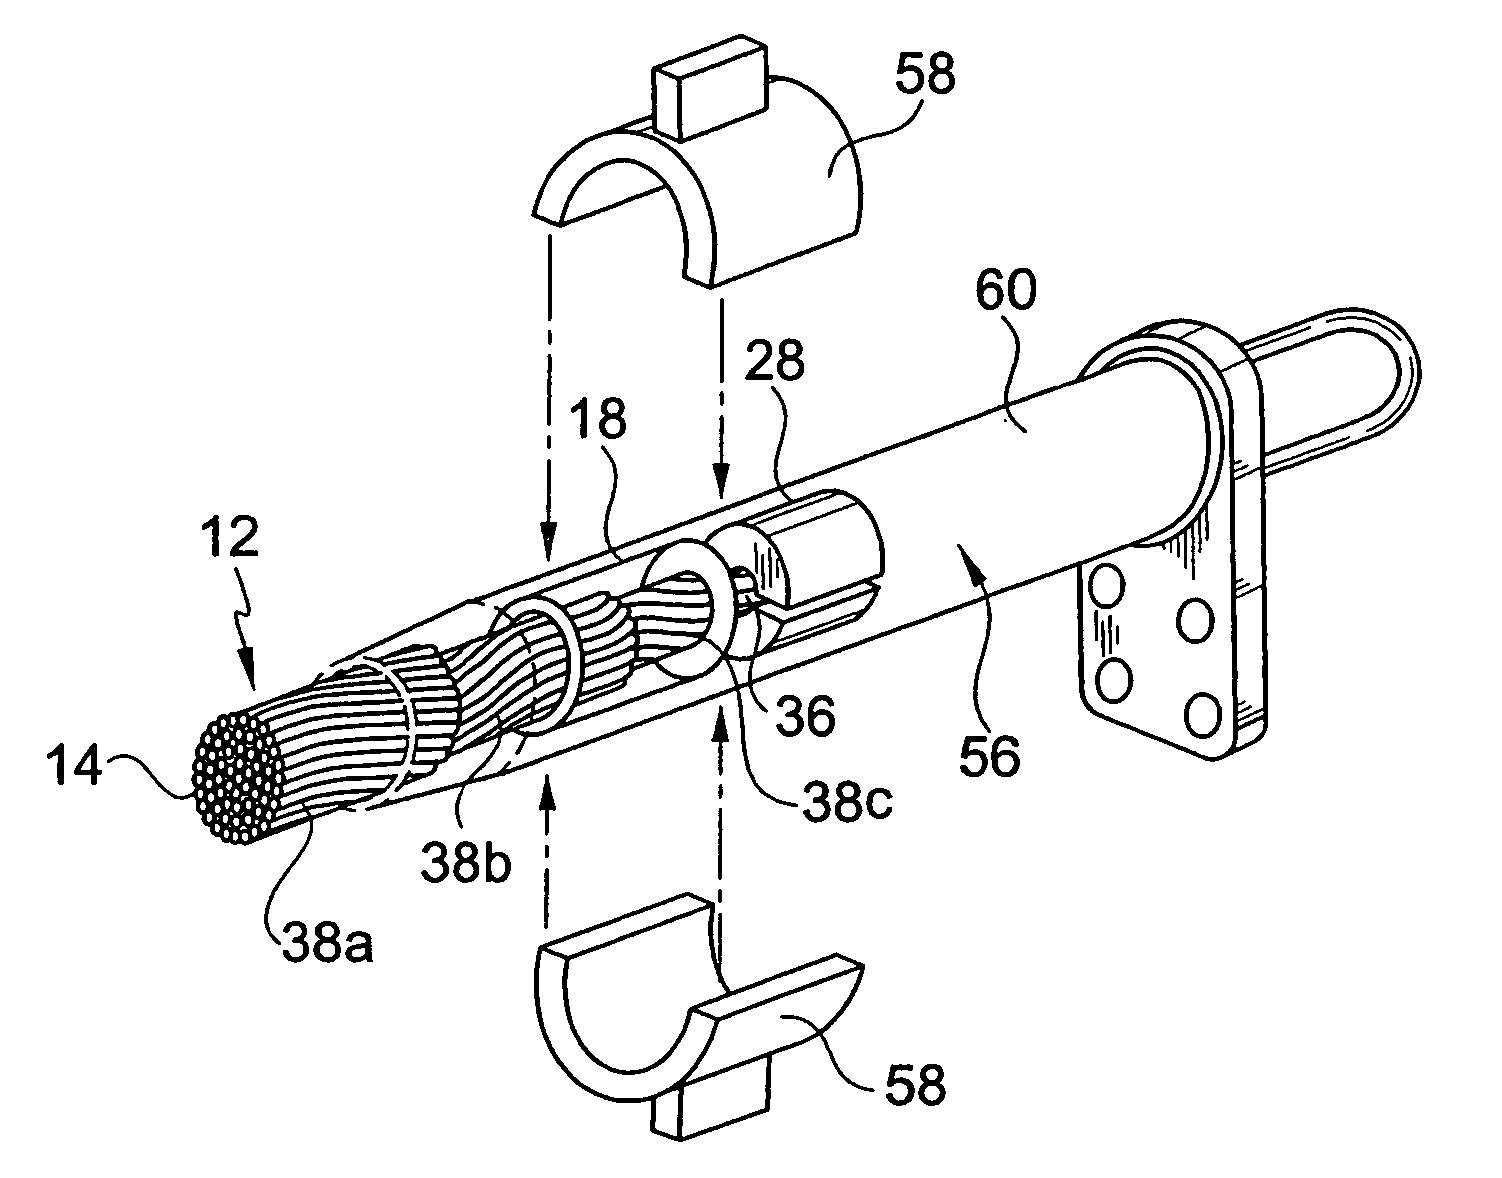 Compression connector assembly